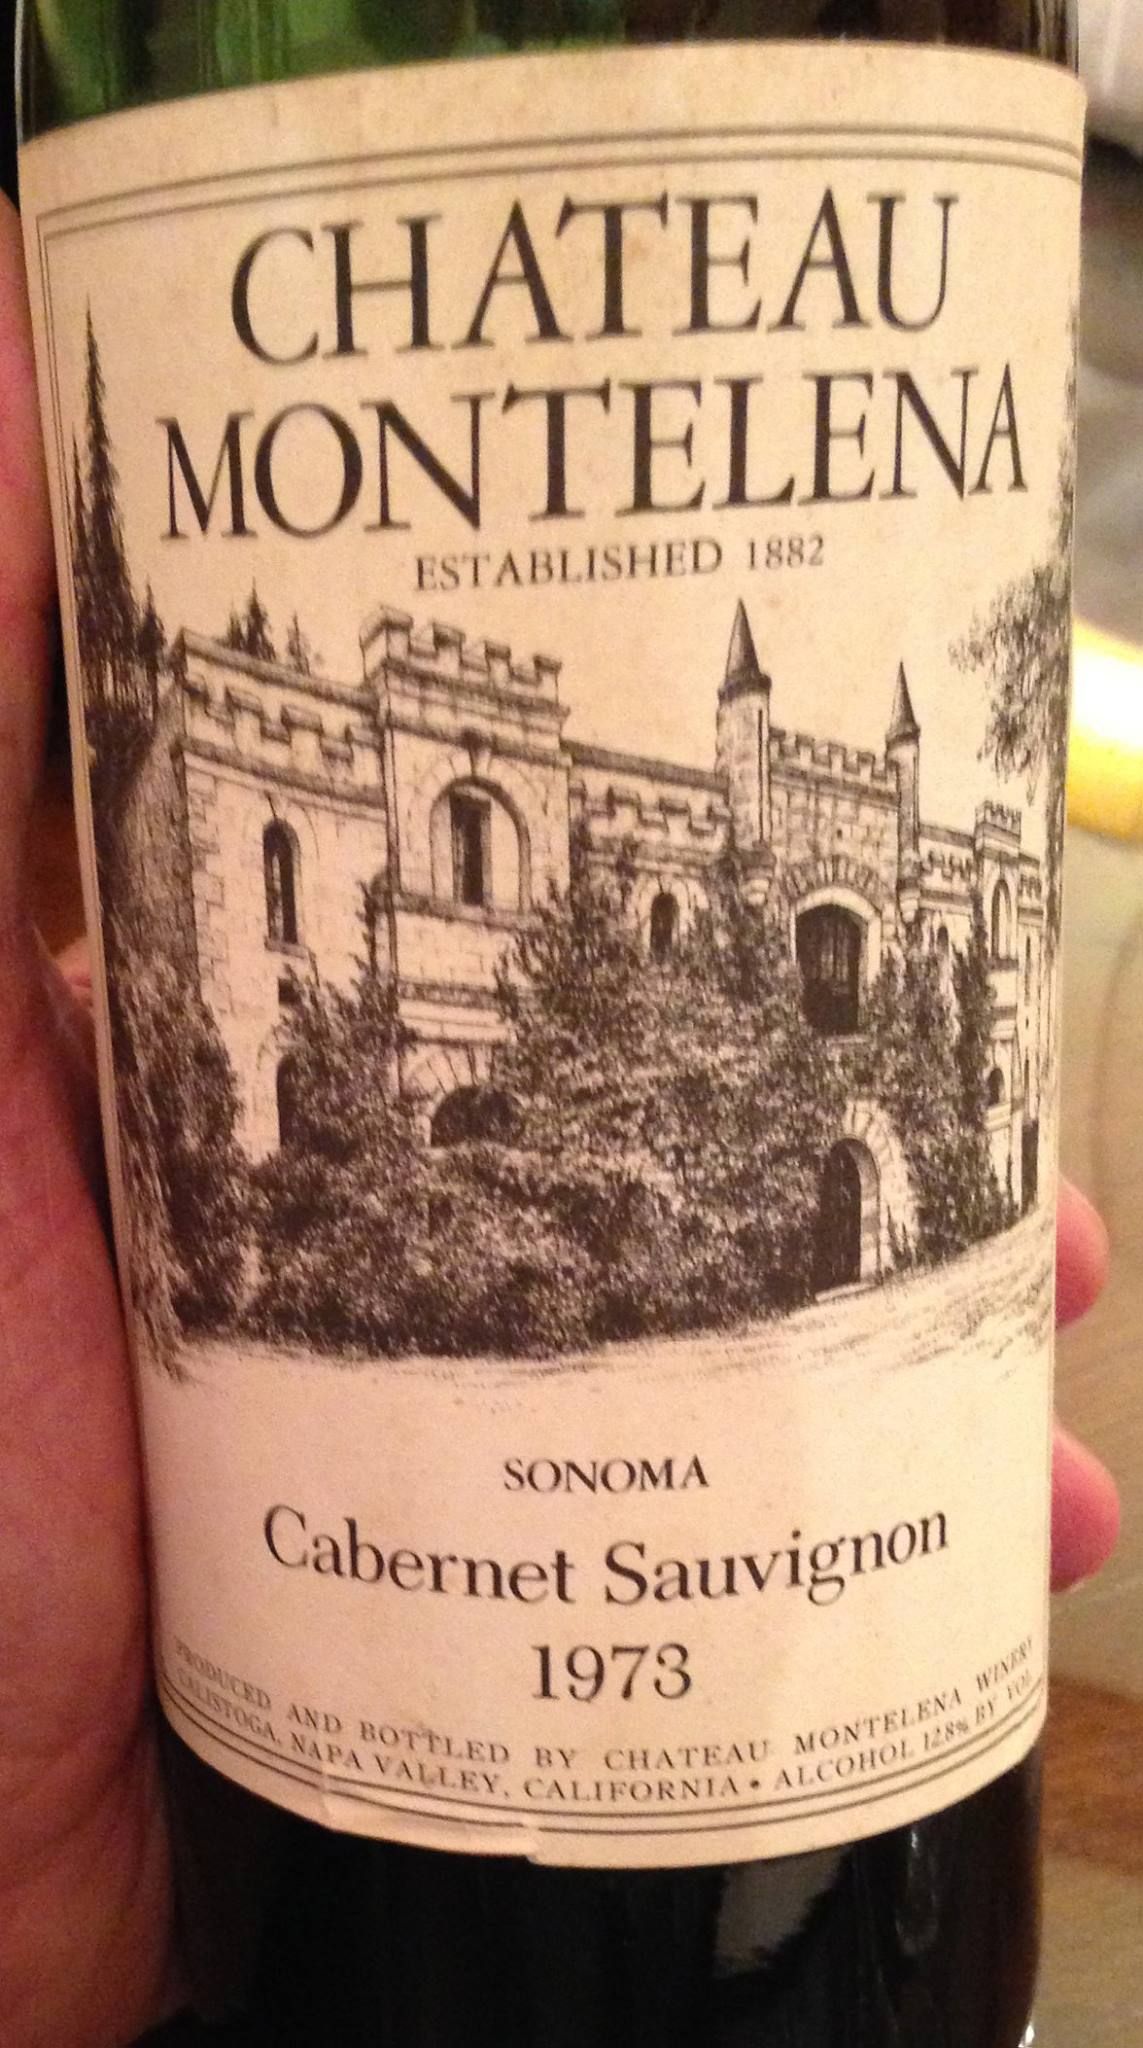 This 1973 Chateau Montelena Cabenet Sauvignon is the first wine ever ...